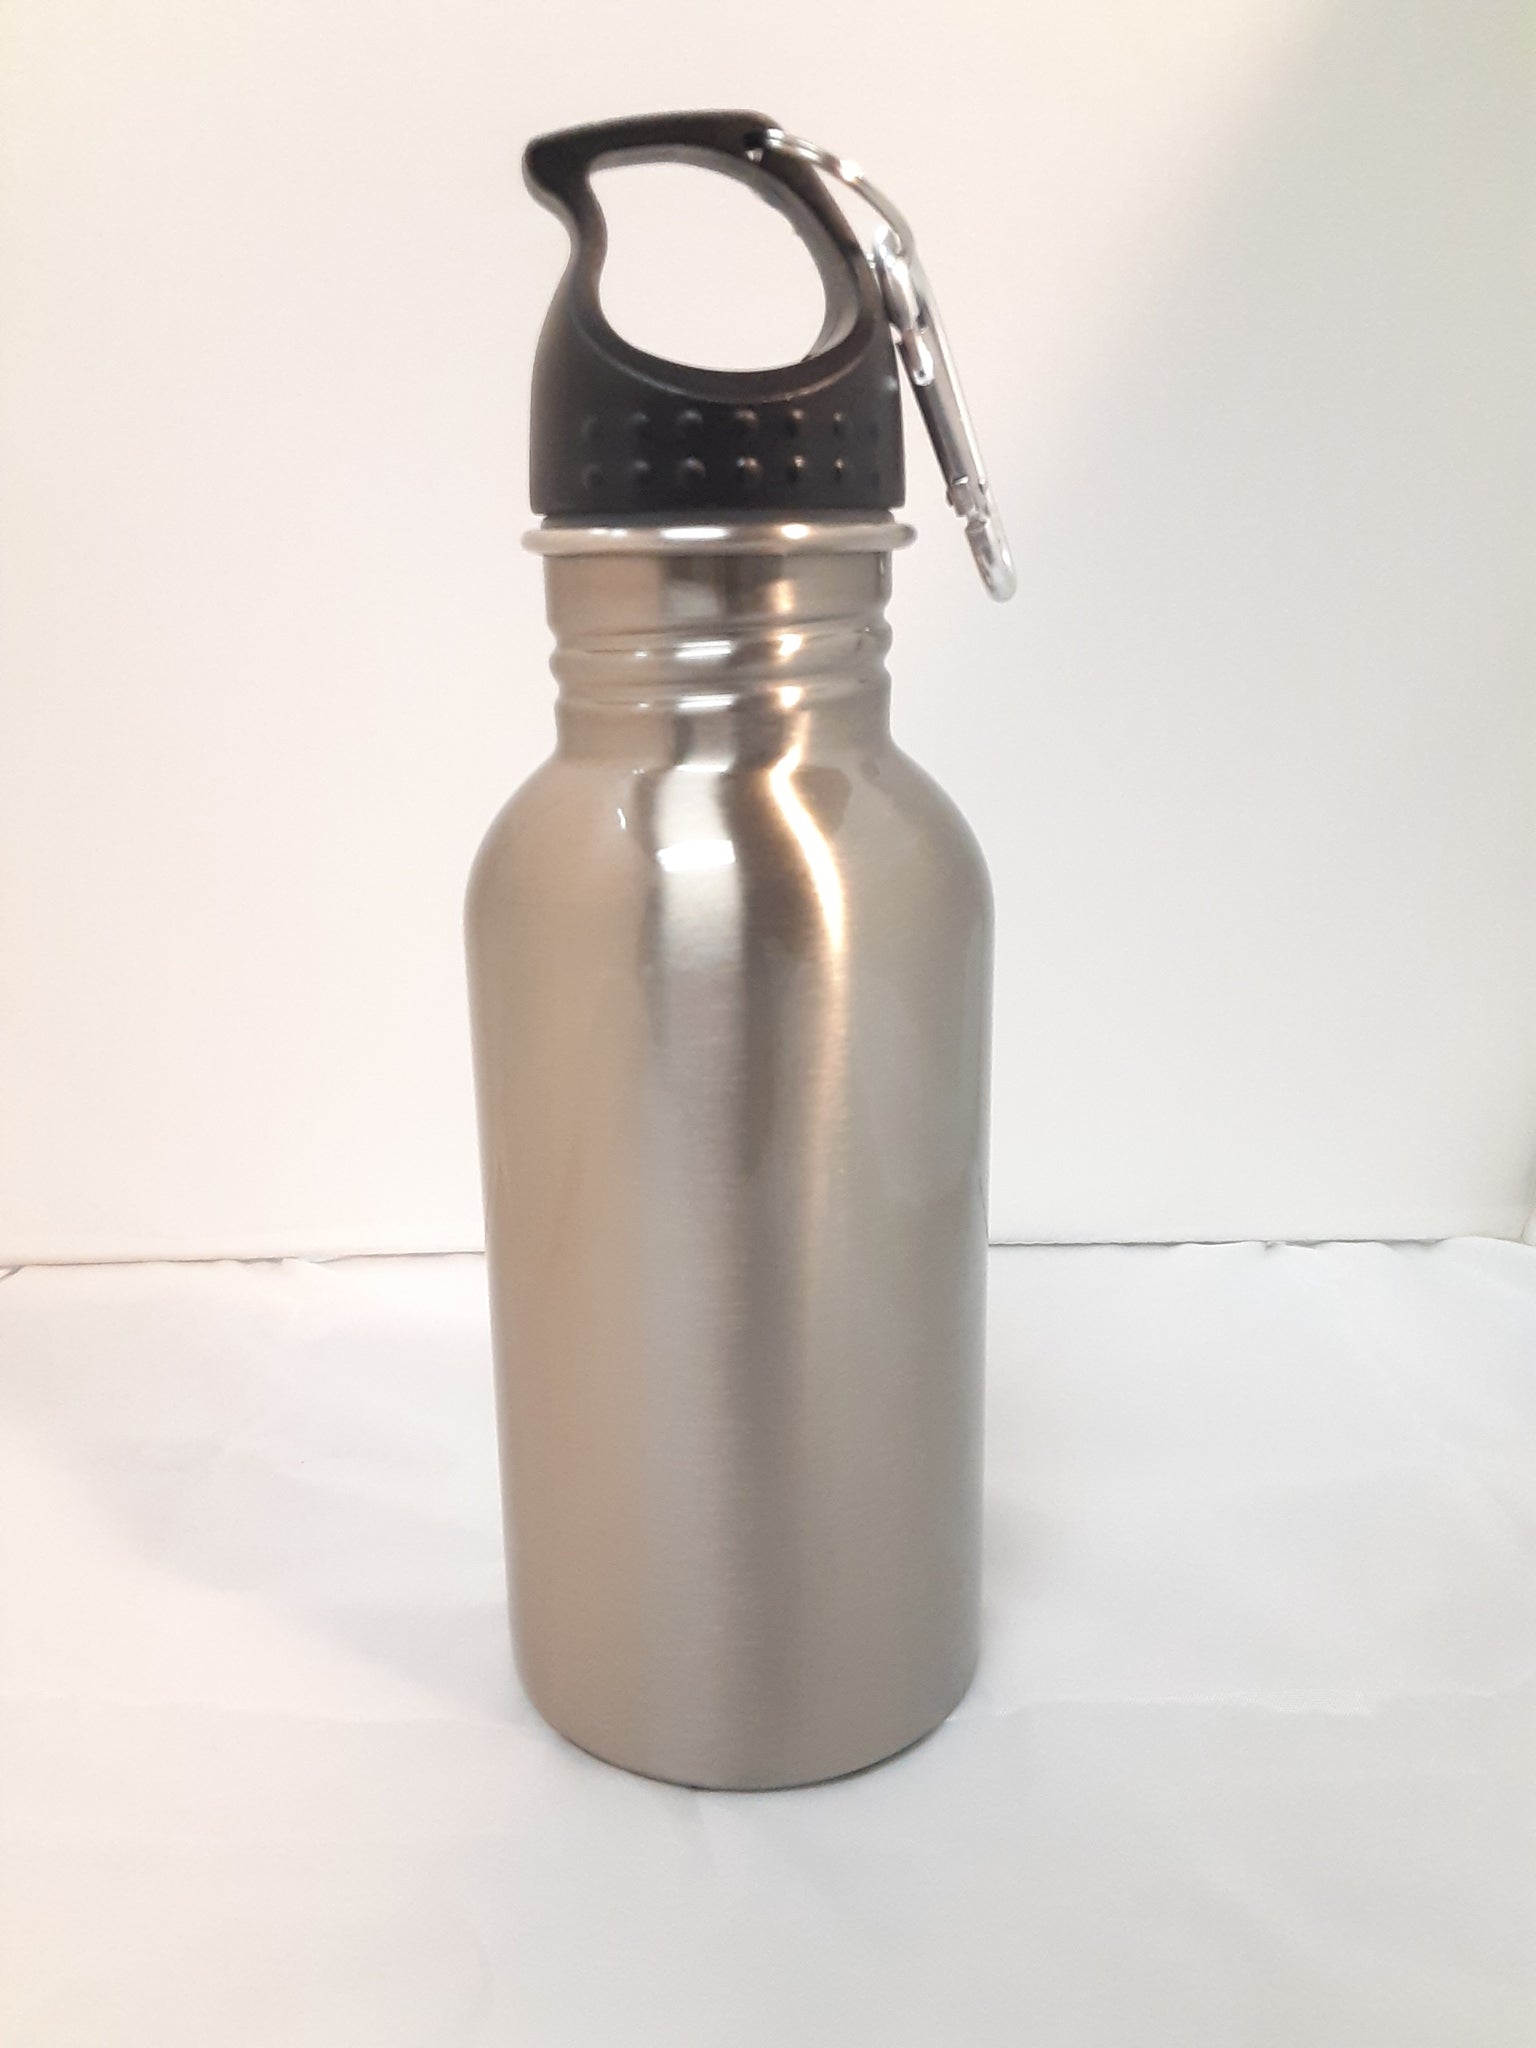 Stainless Steel Water Bottle with 'I Shred' Vintage Design Showing